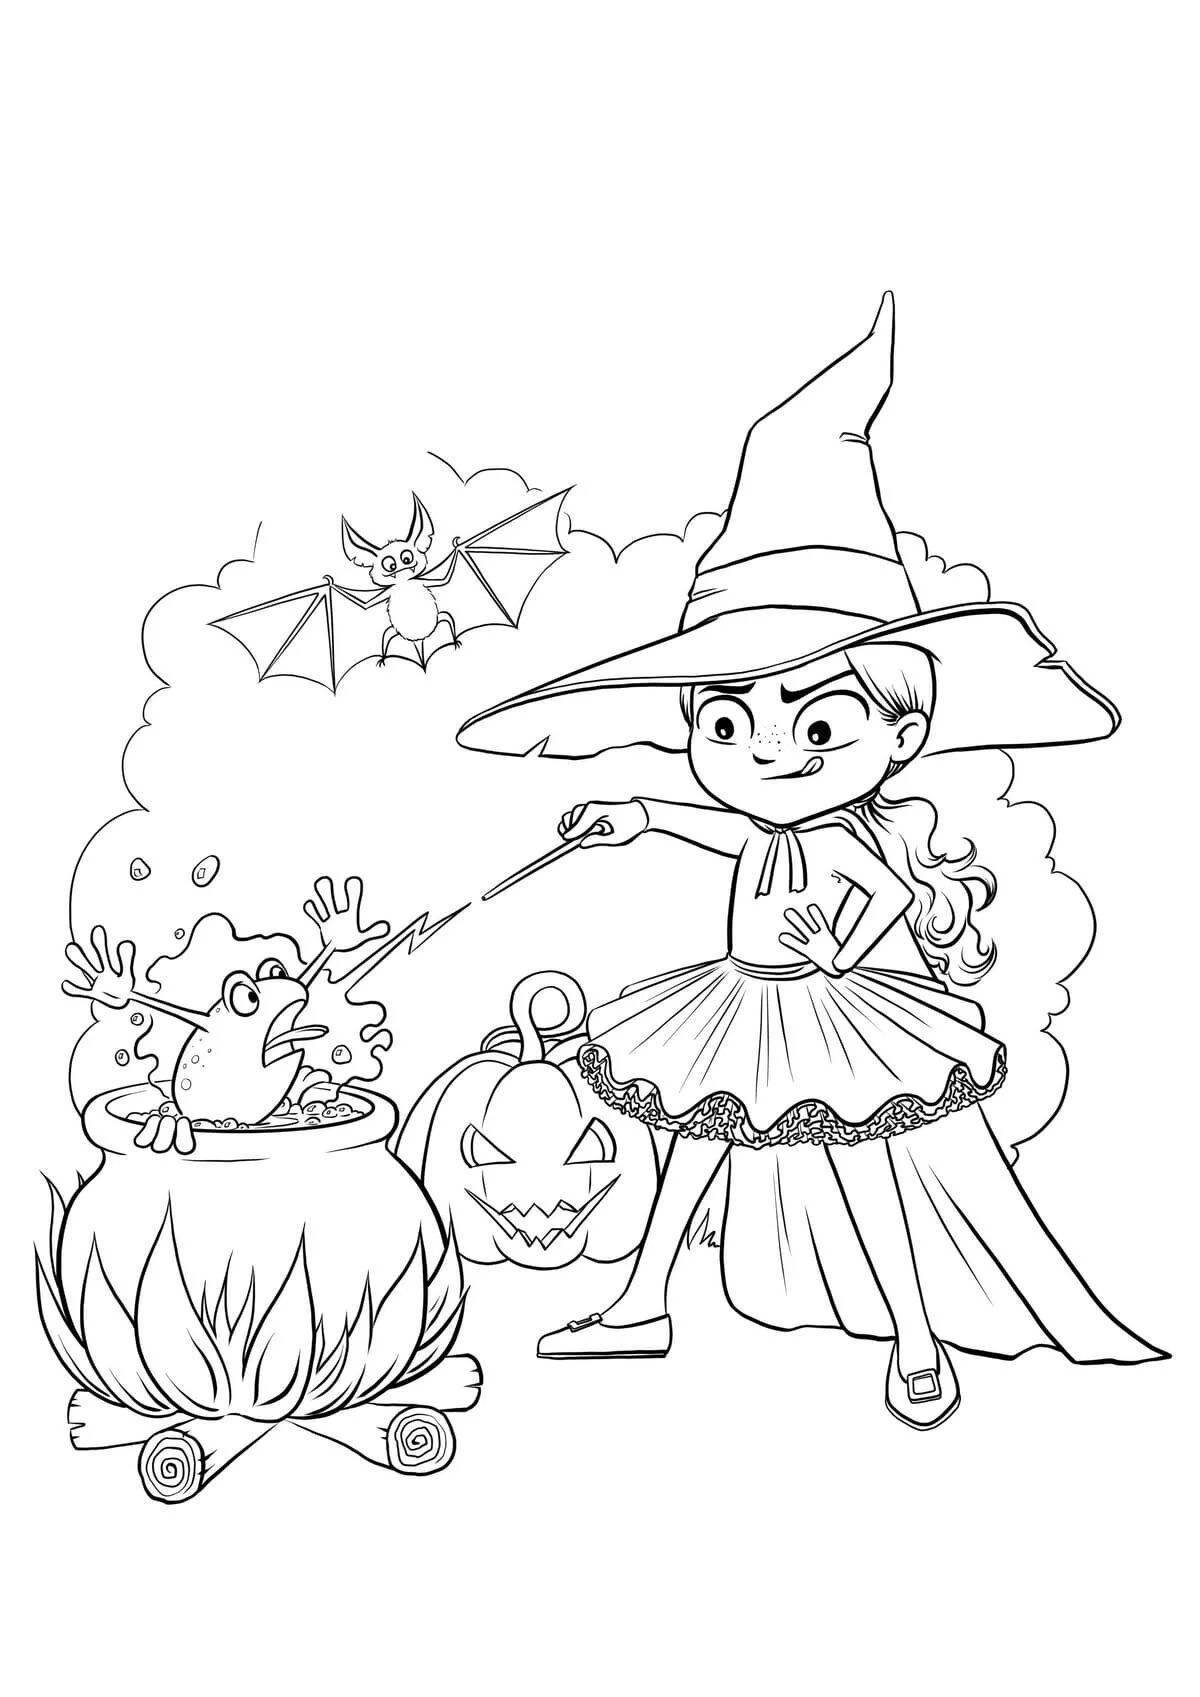 Chilling witch coloring book